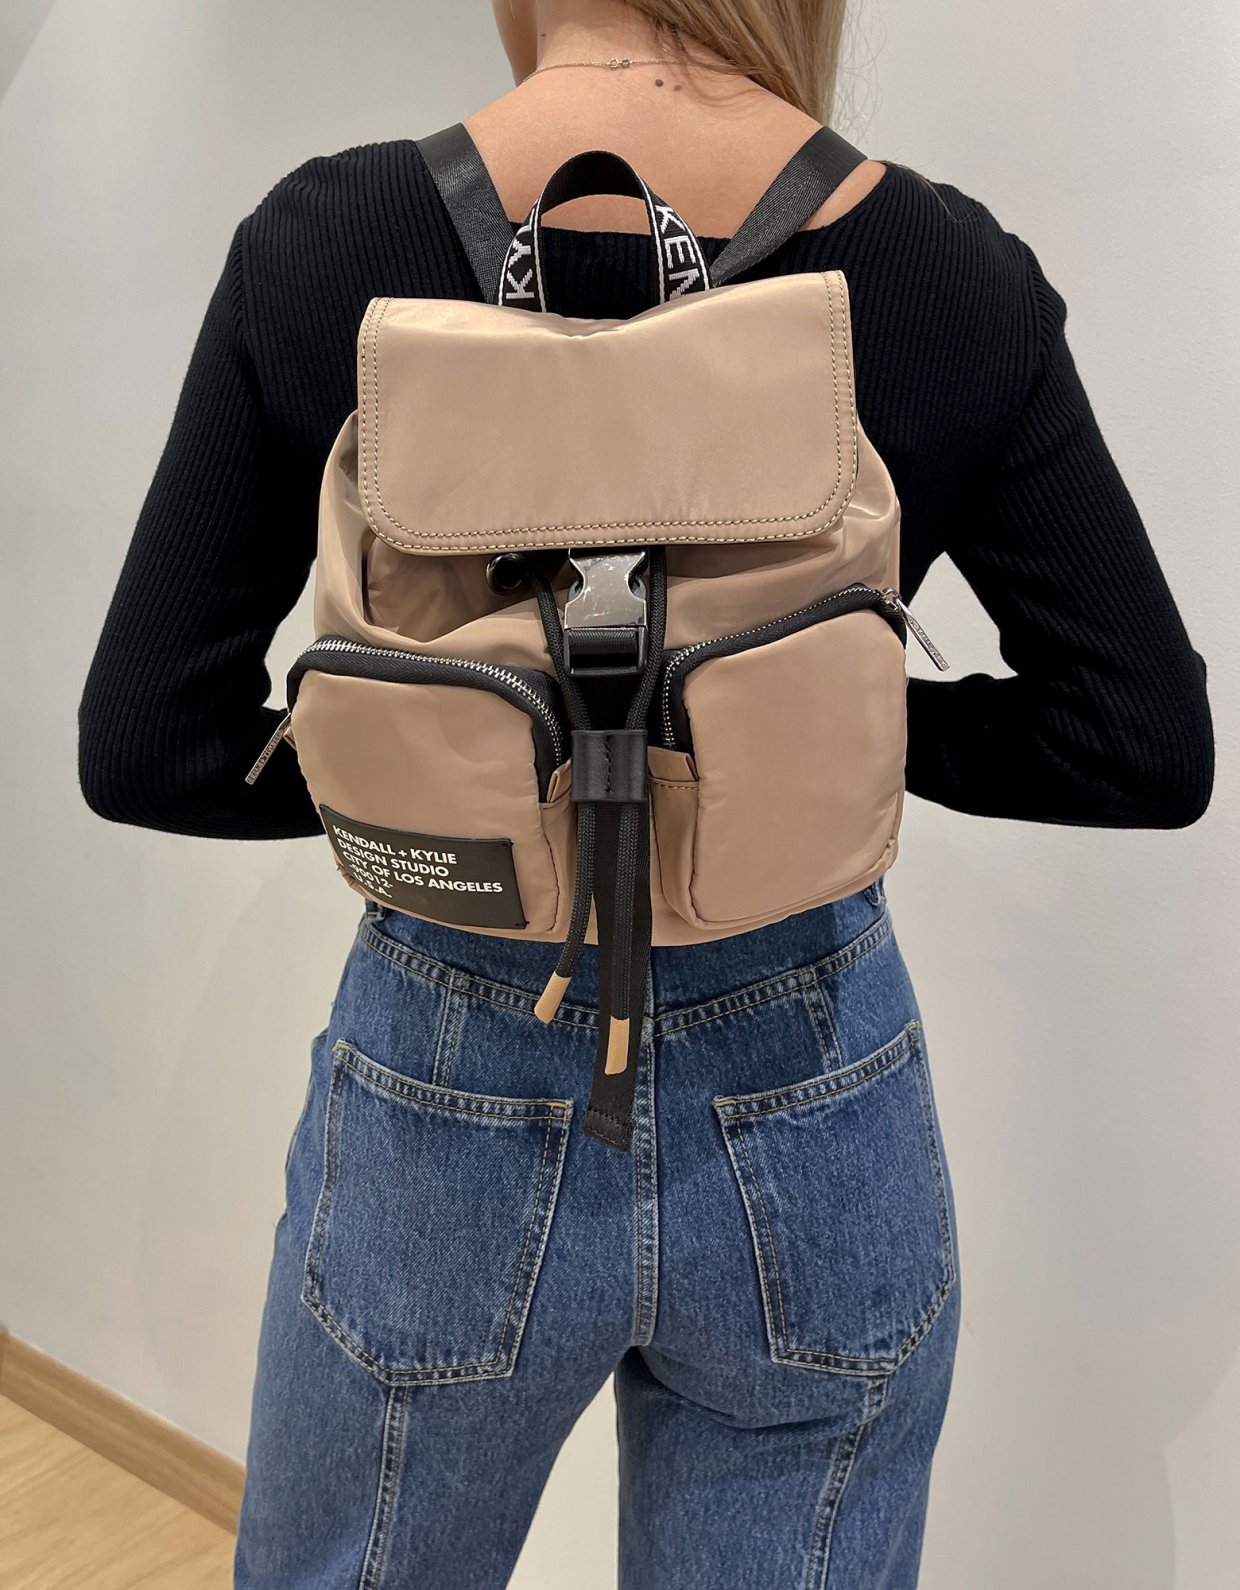 Kendall + Kylie Jesse backpack taupe